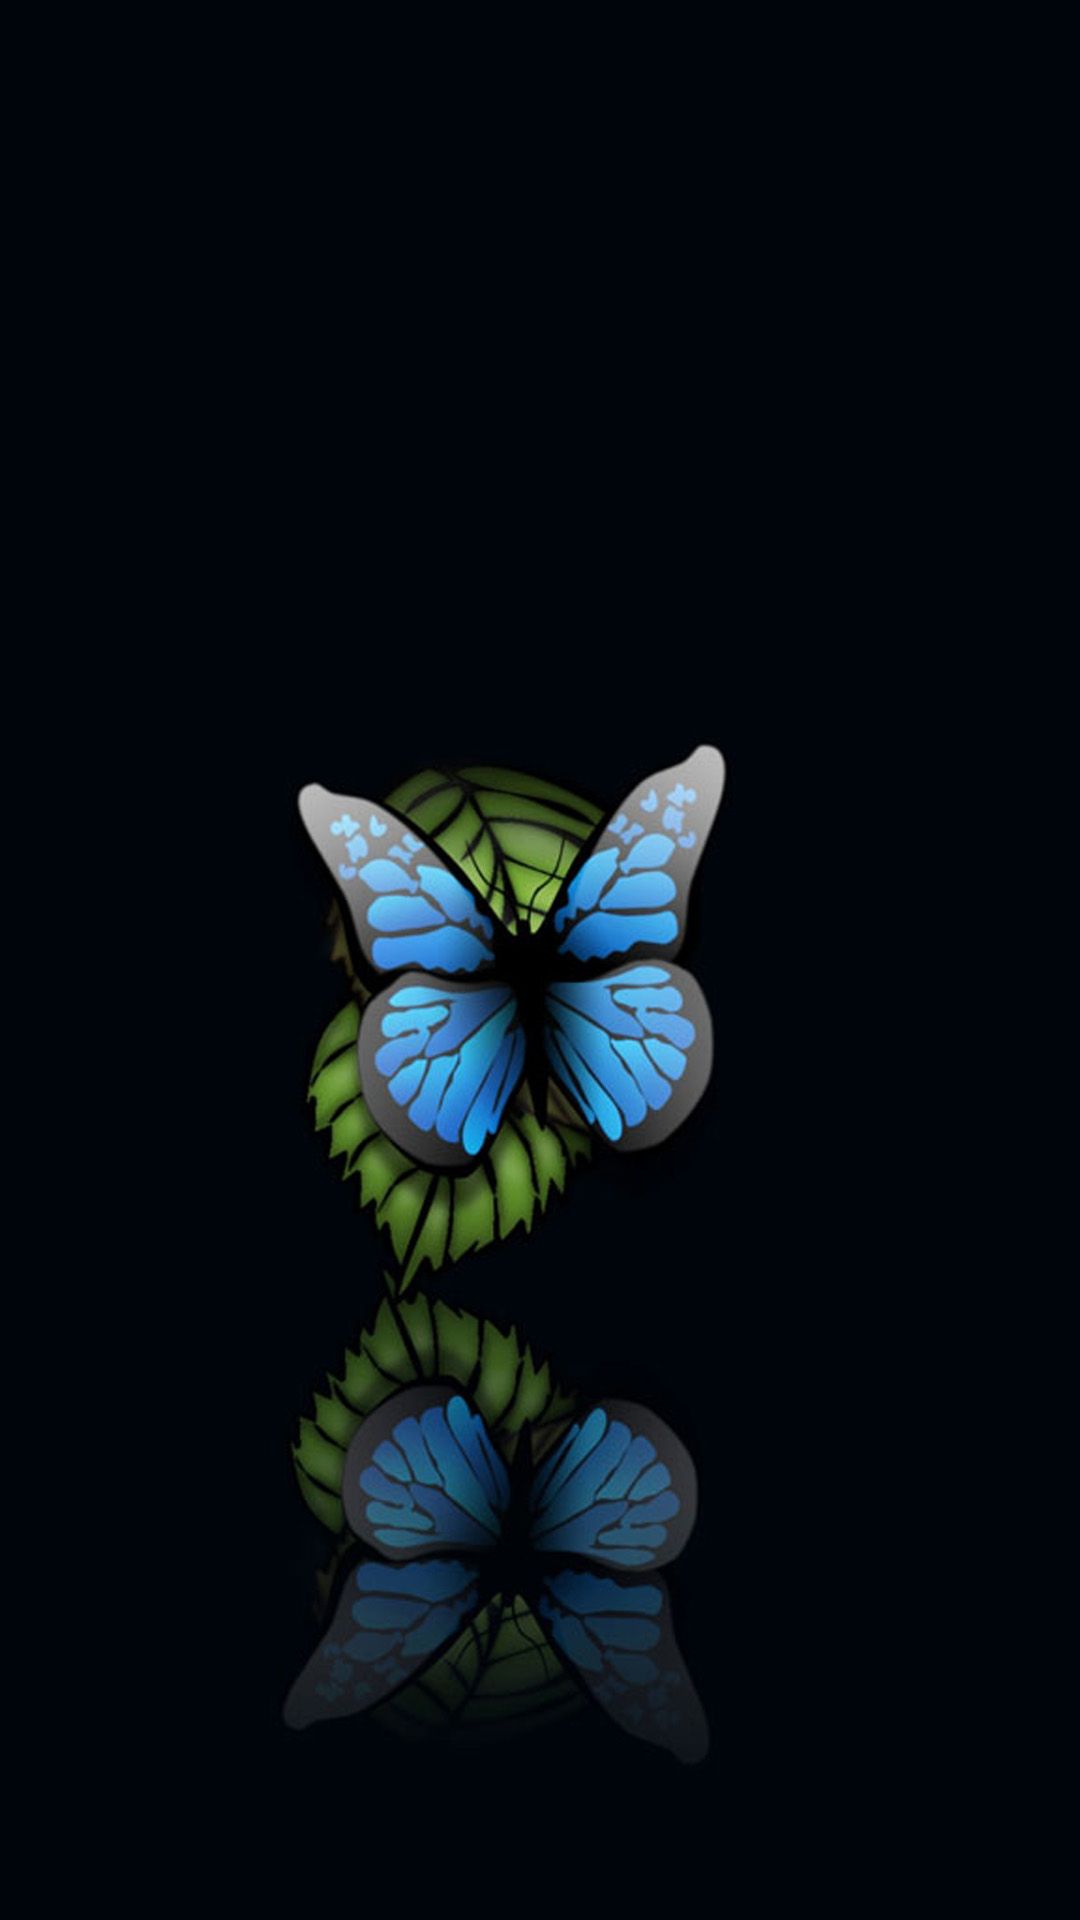 Free download Blue Butterfly Black Background Android Wallpaper